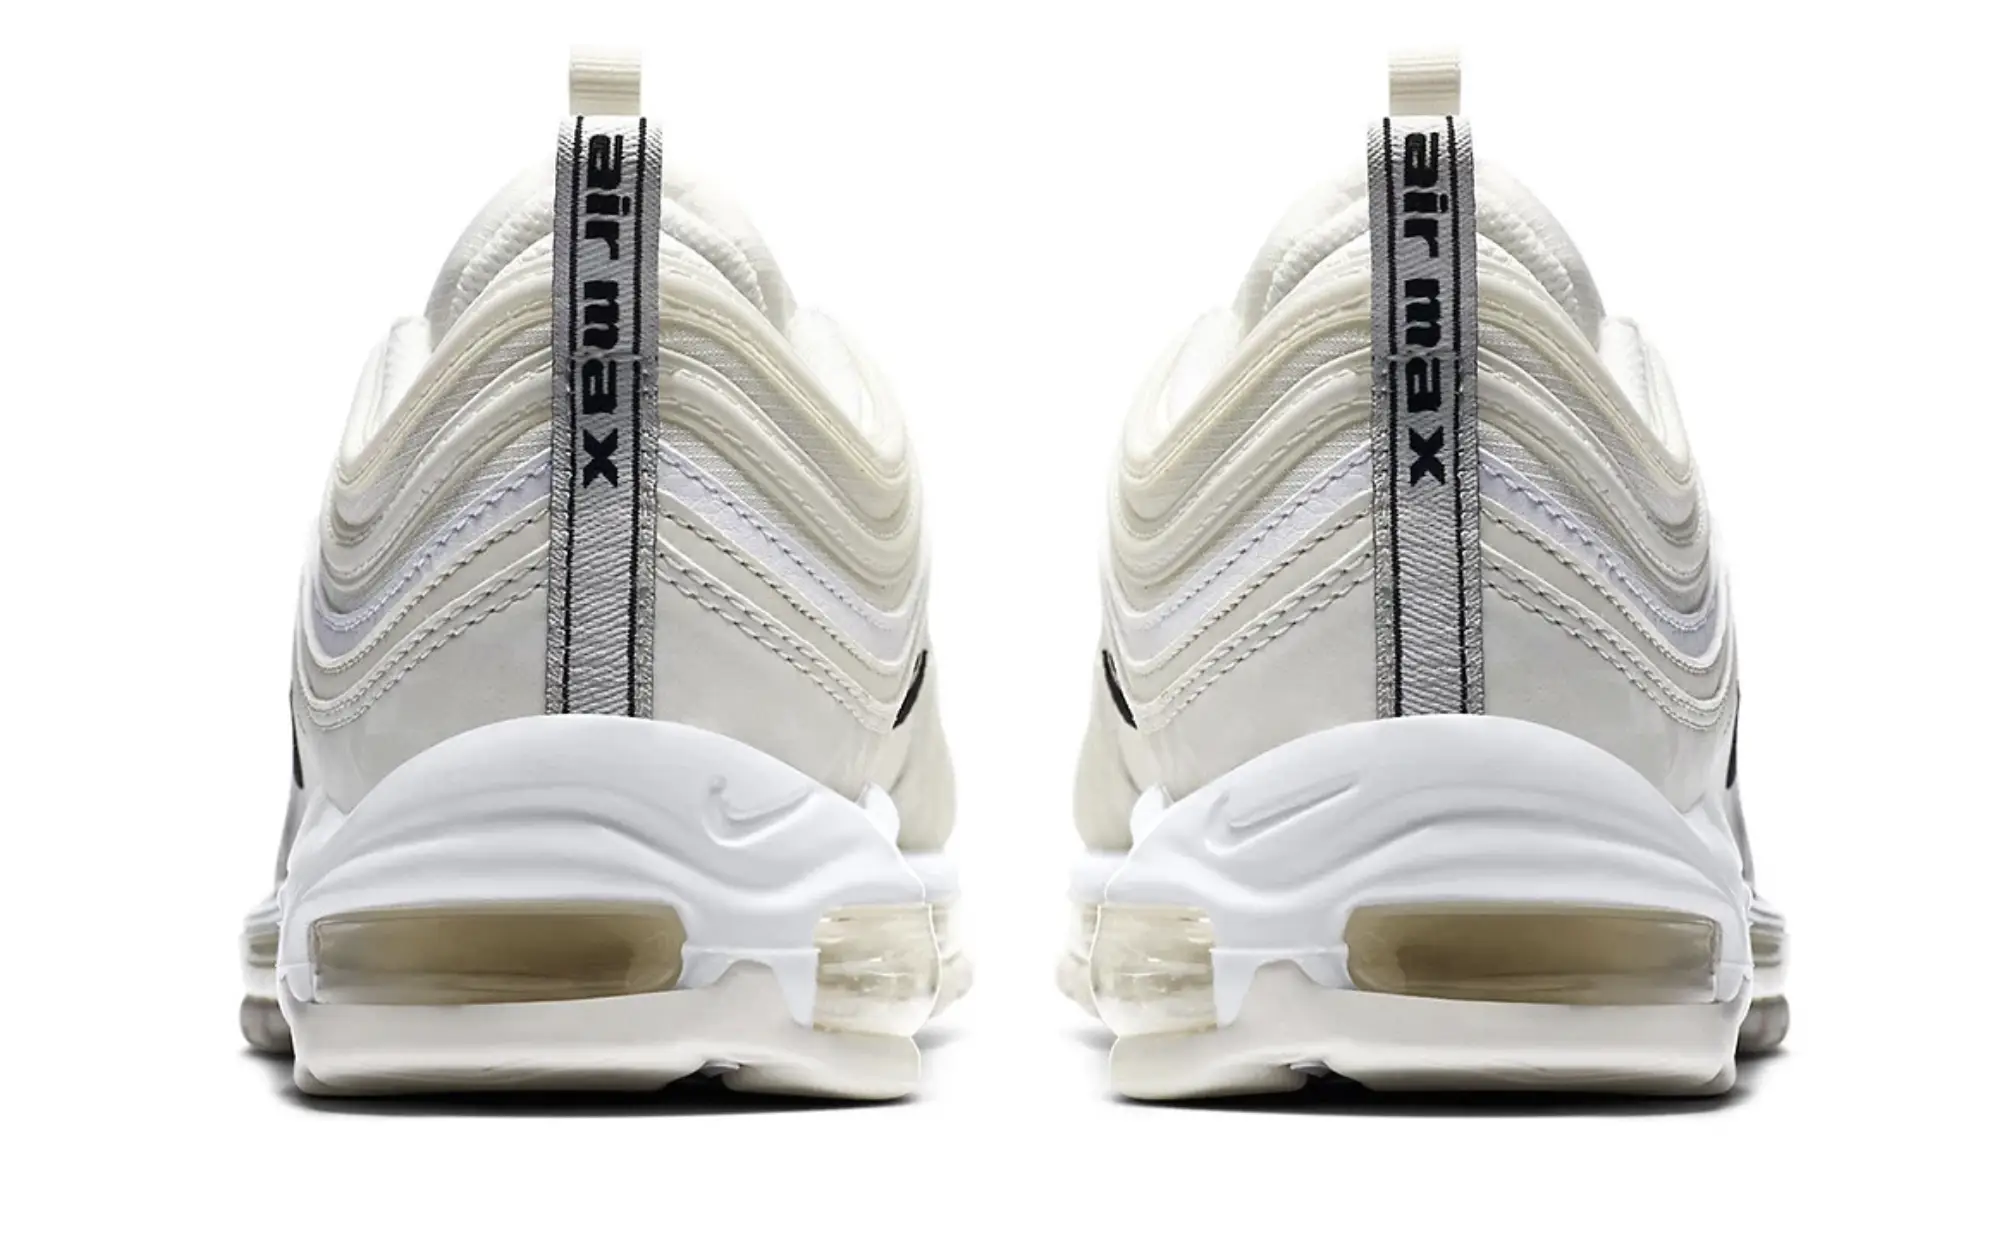 This Nike Air Max 97 Has Secret Detailing That You Need To See | The ...